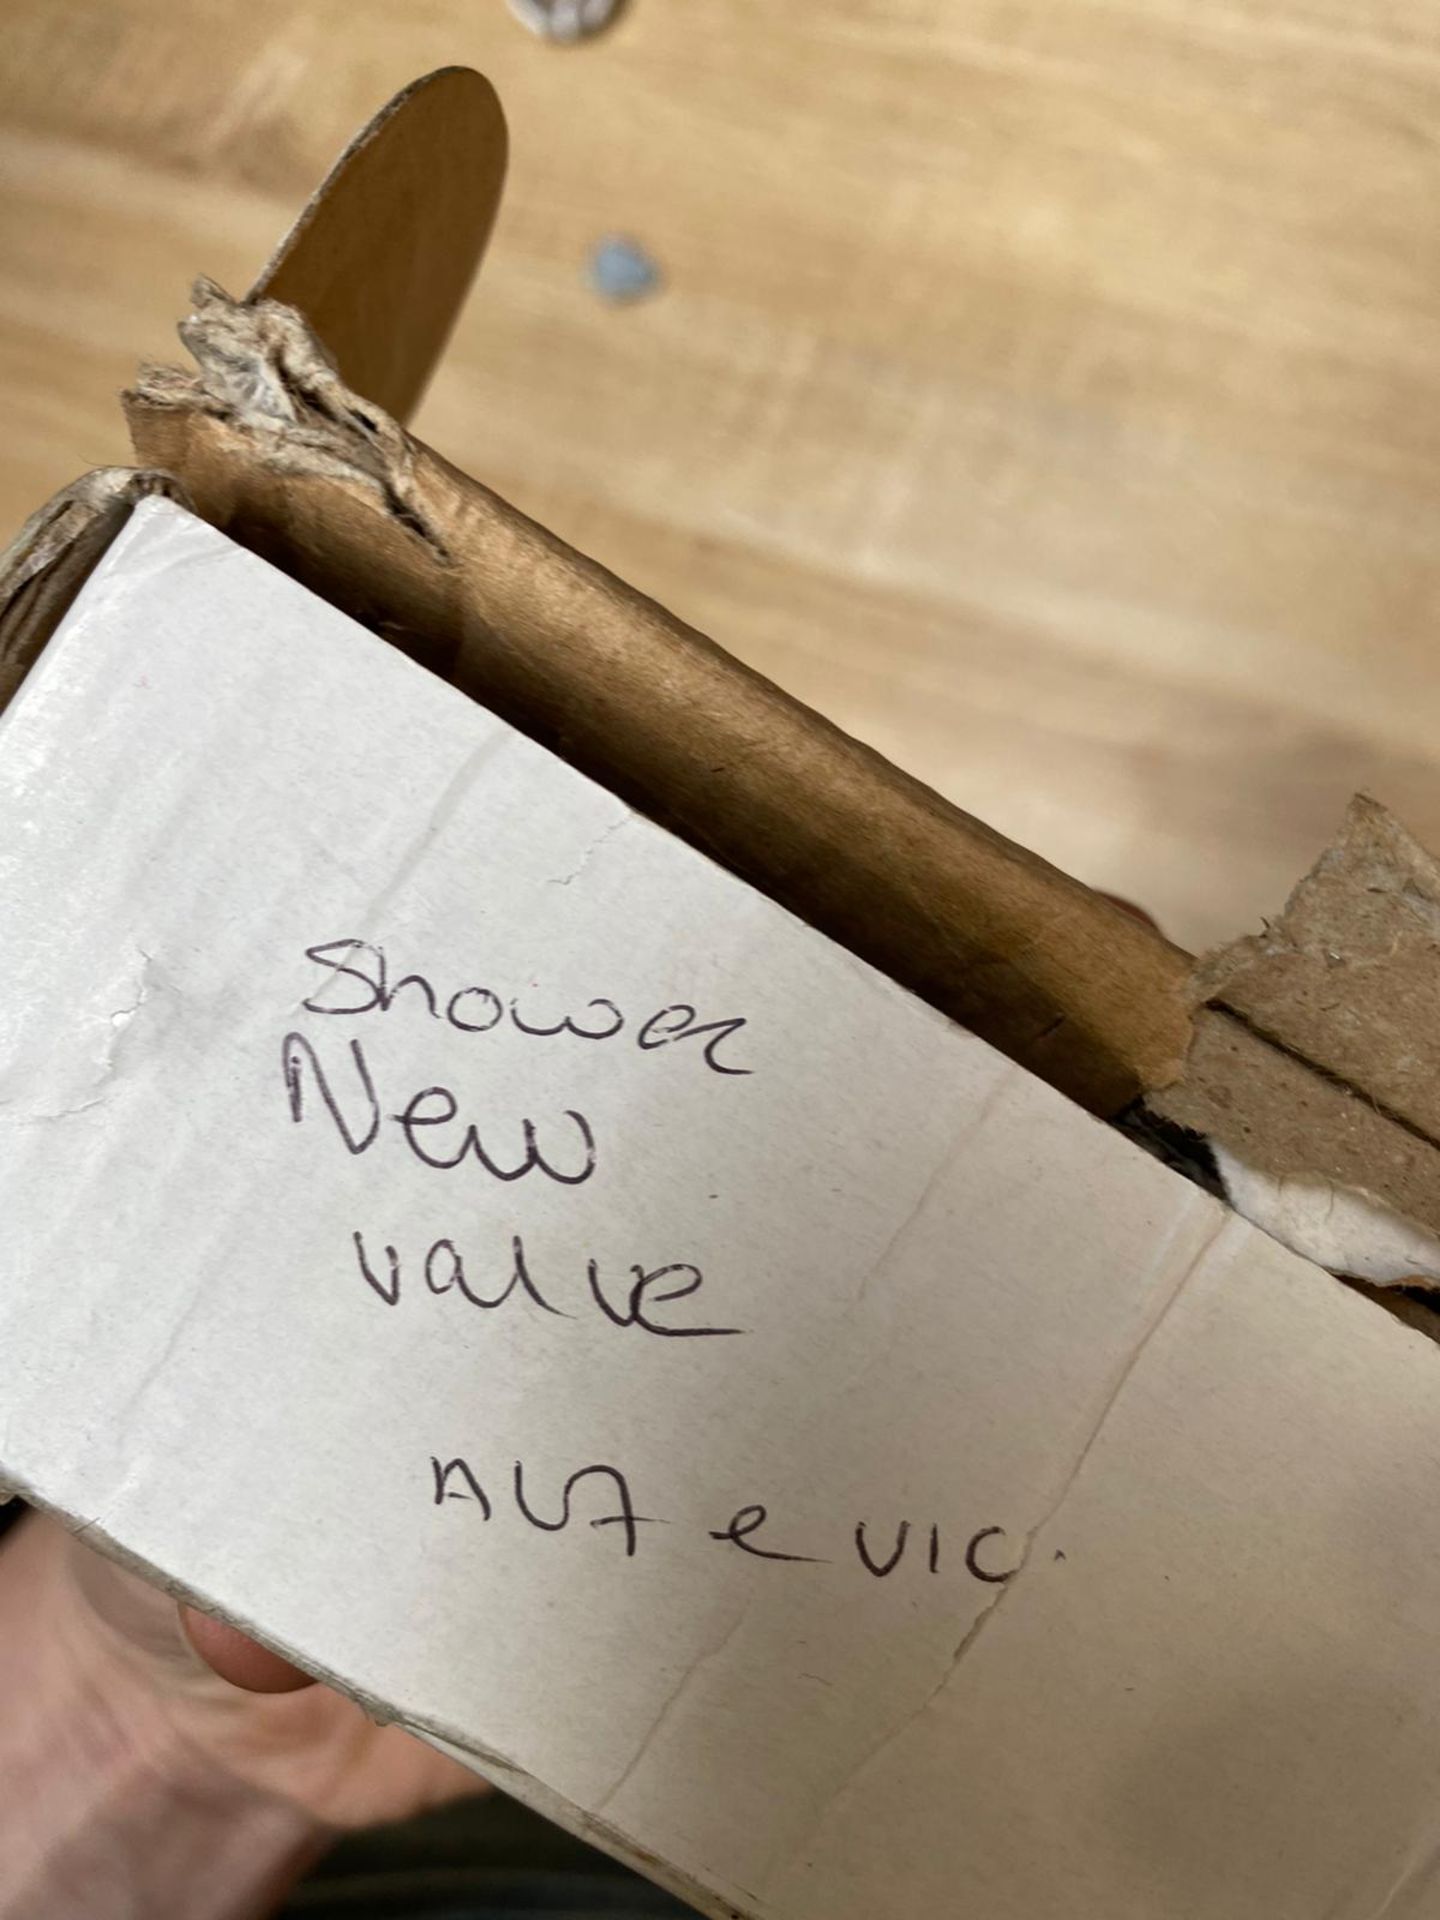 1 x Shower Valve - Product Code: A17/VIC - New Boxed Stock - Location: Altrincham WA14 - - Image 2 of 2